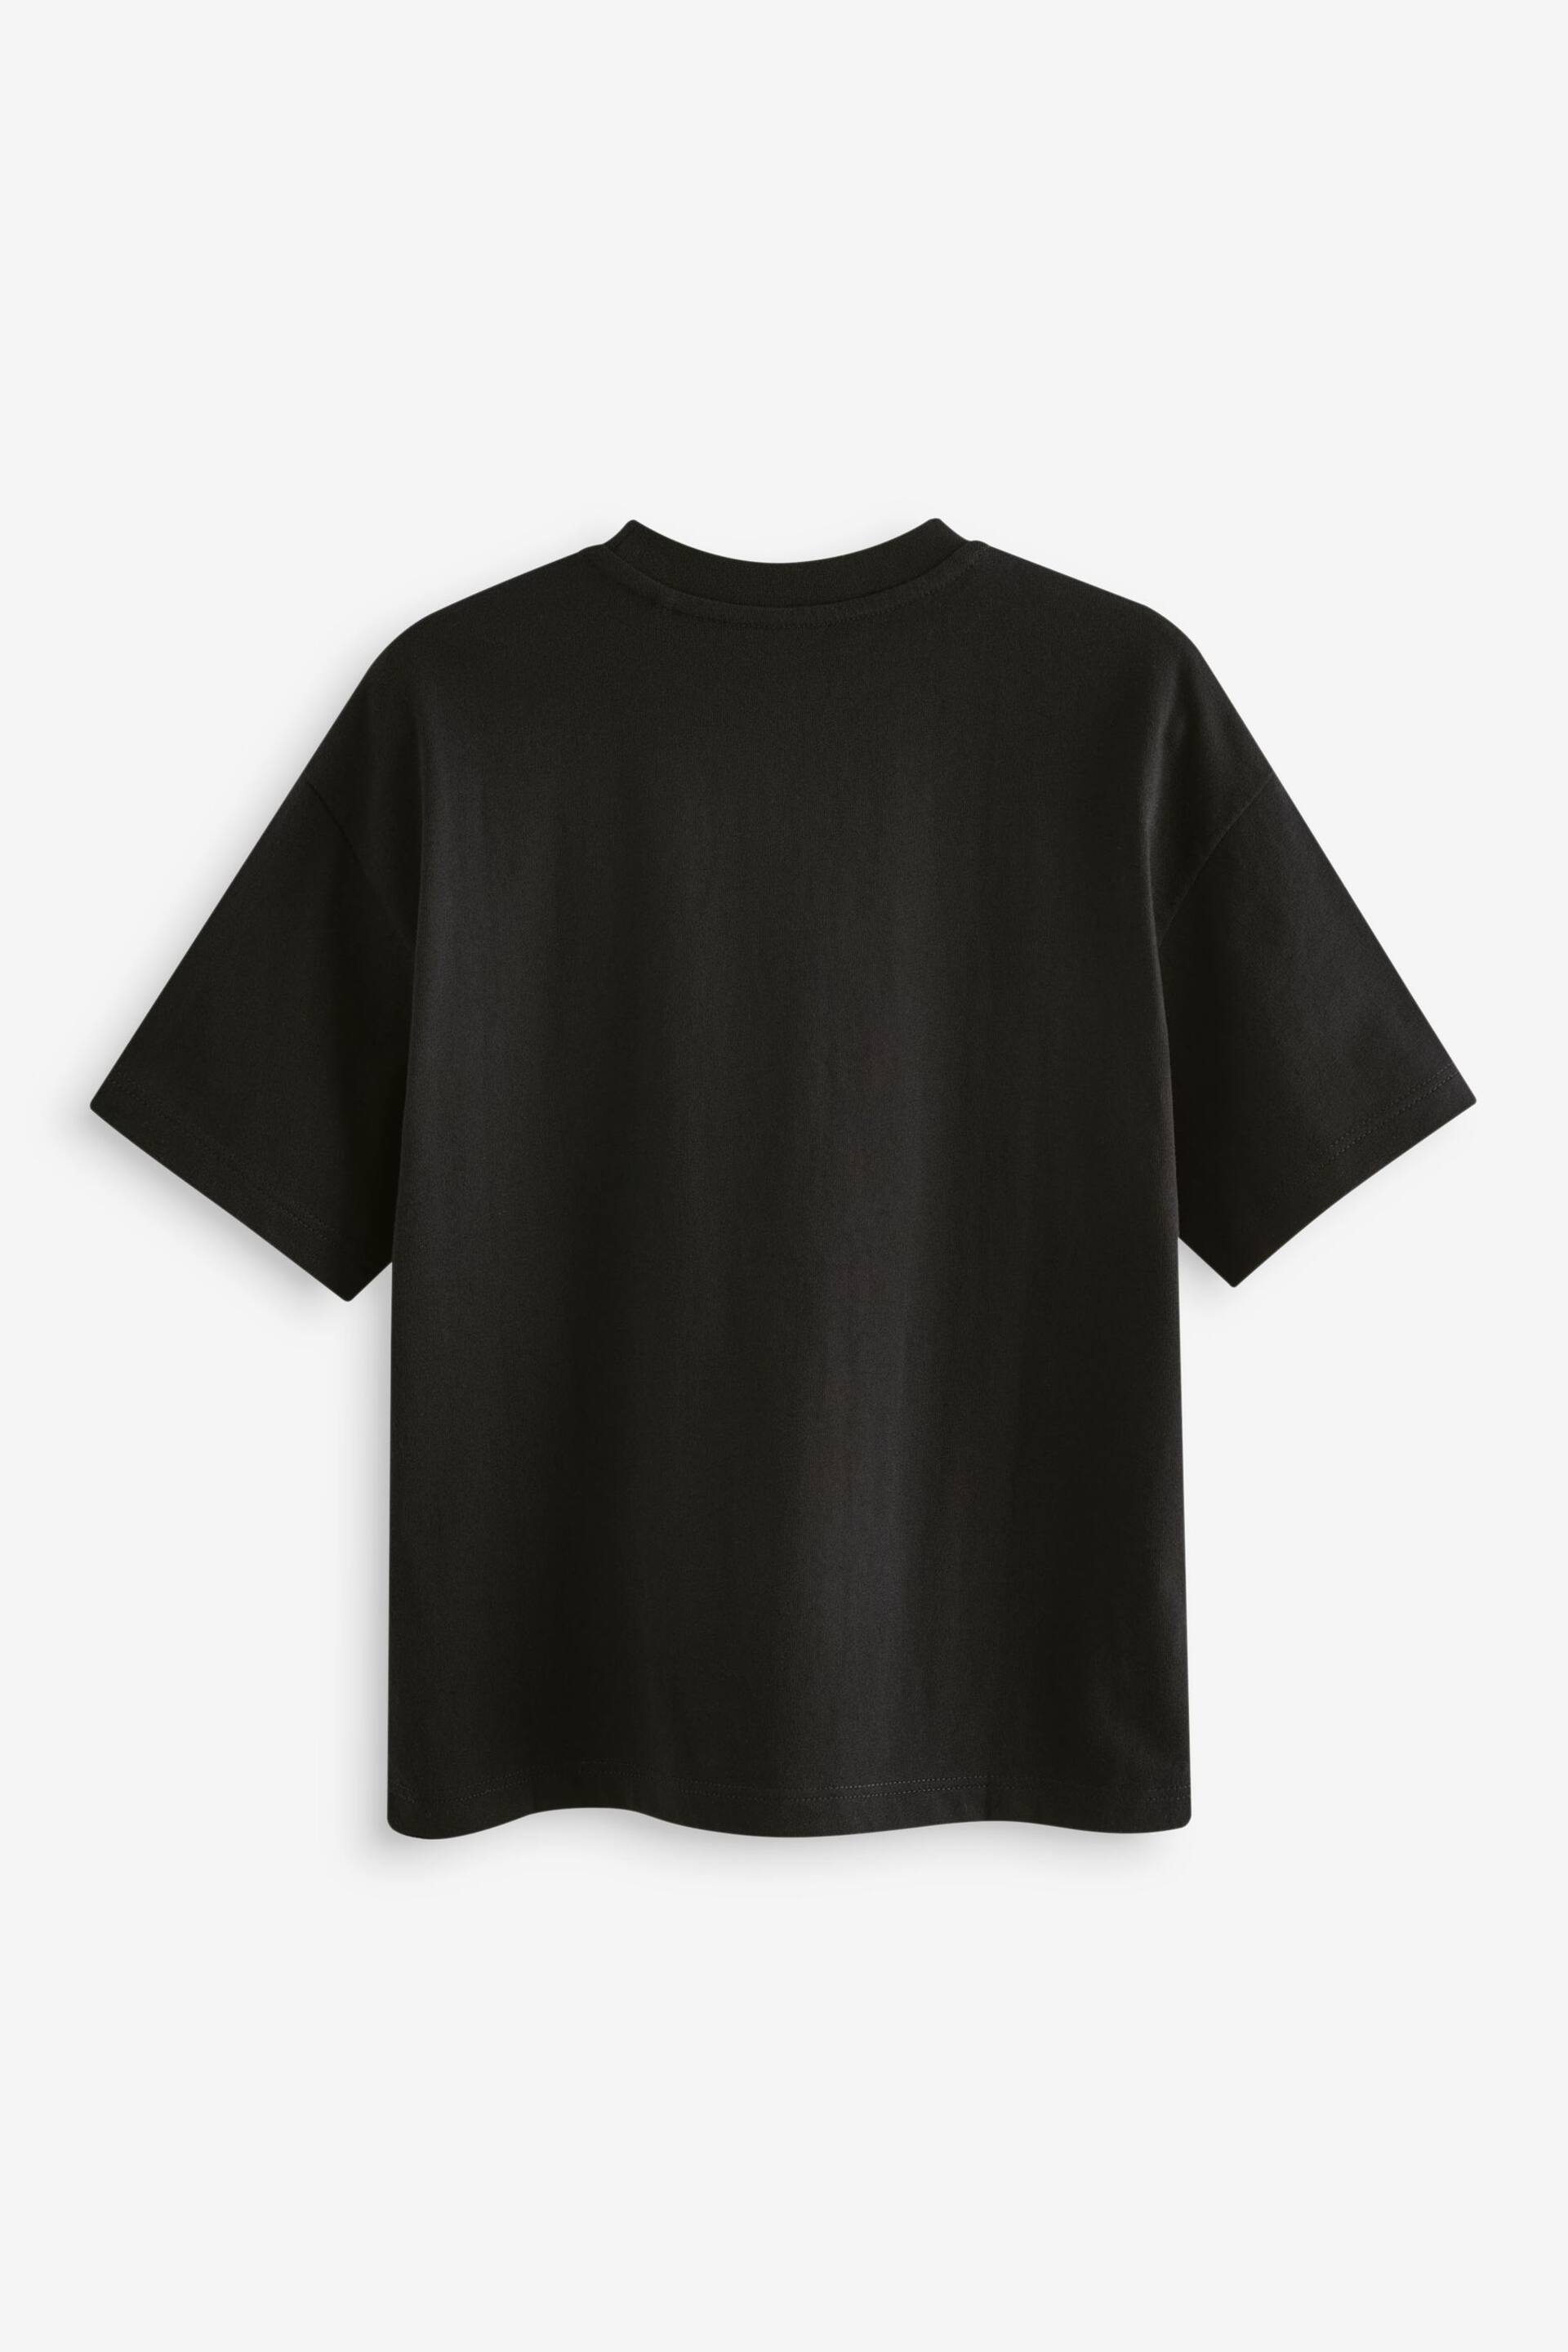 Black Relaxed Fit Short Sleeve Graphic T-Shirt (3-16yrs) - Image 2 of 3